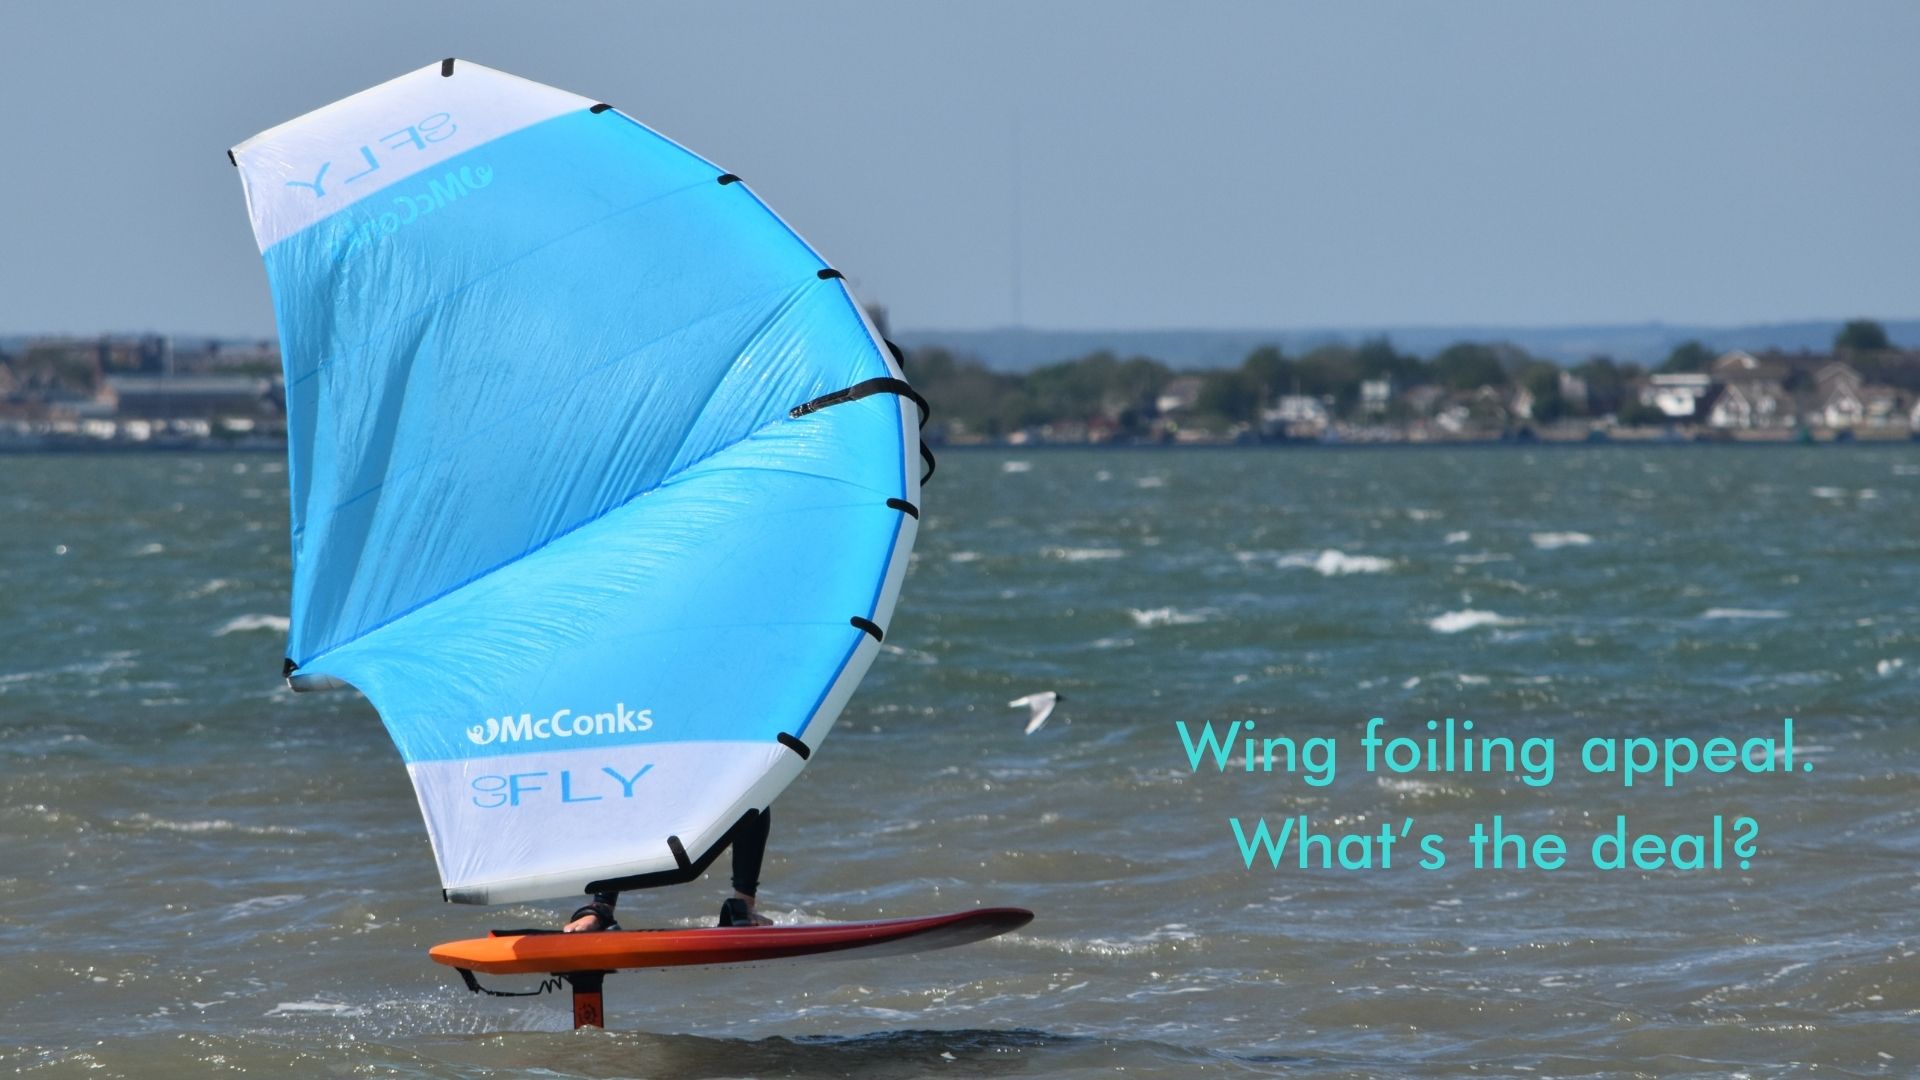 Wing foiling appeal. What’s the deal #1